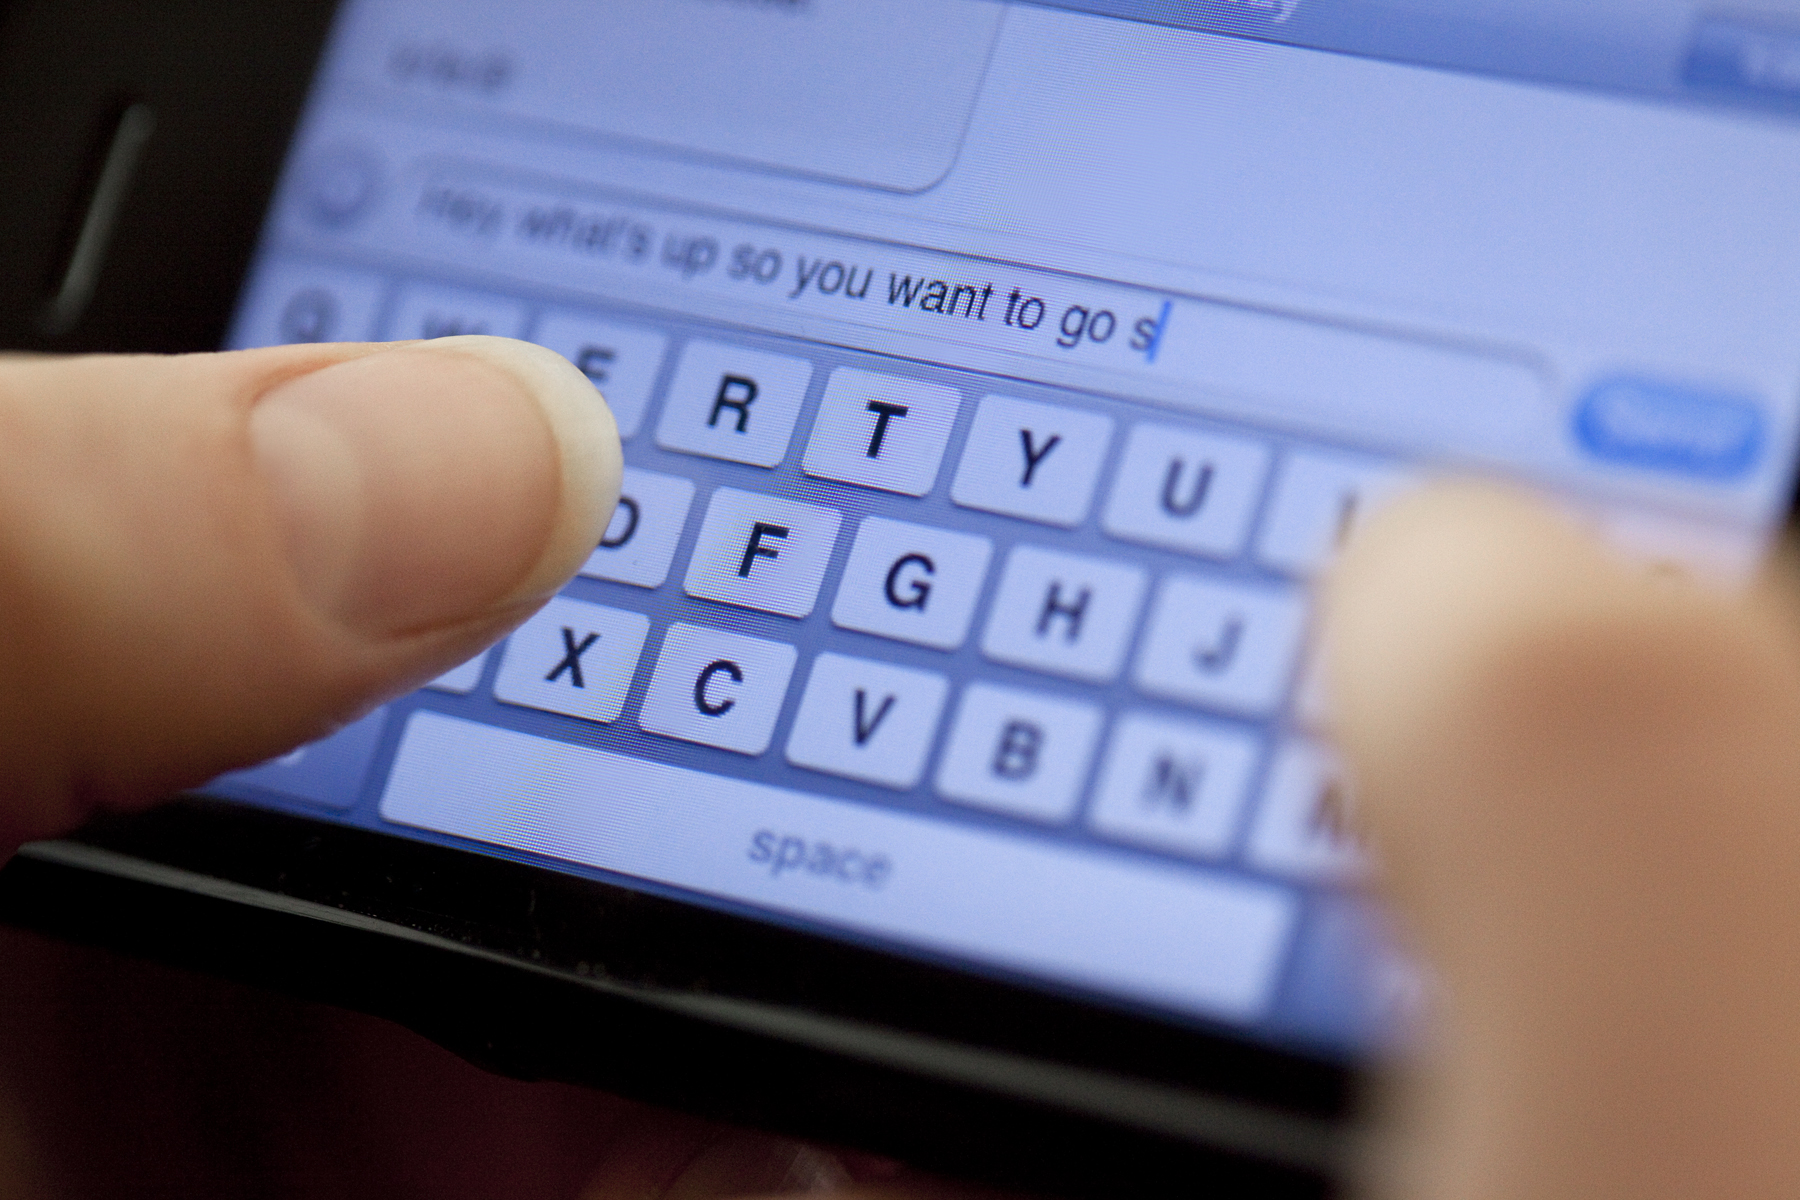 Why using a period in a text message could make you sound insincere or angry